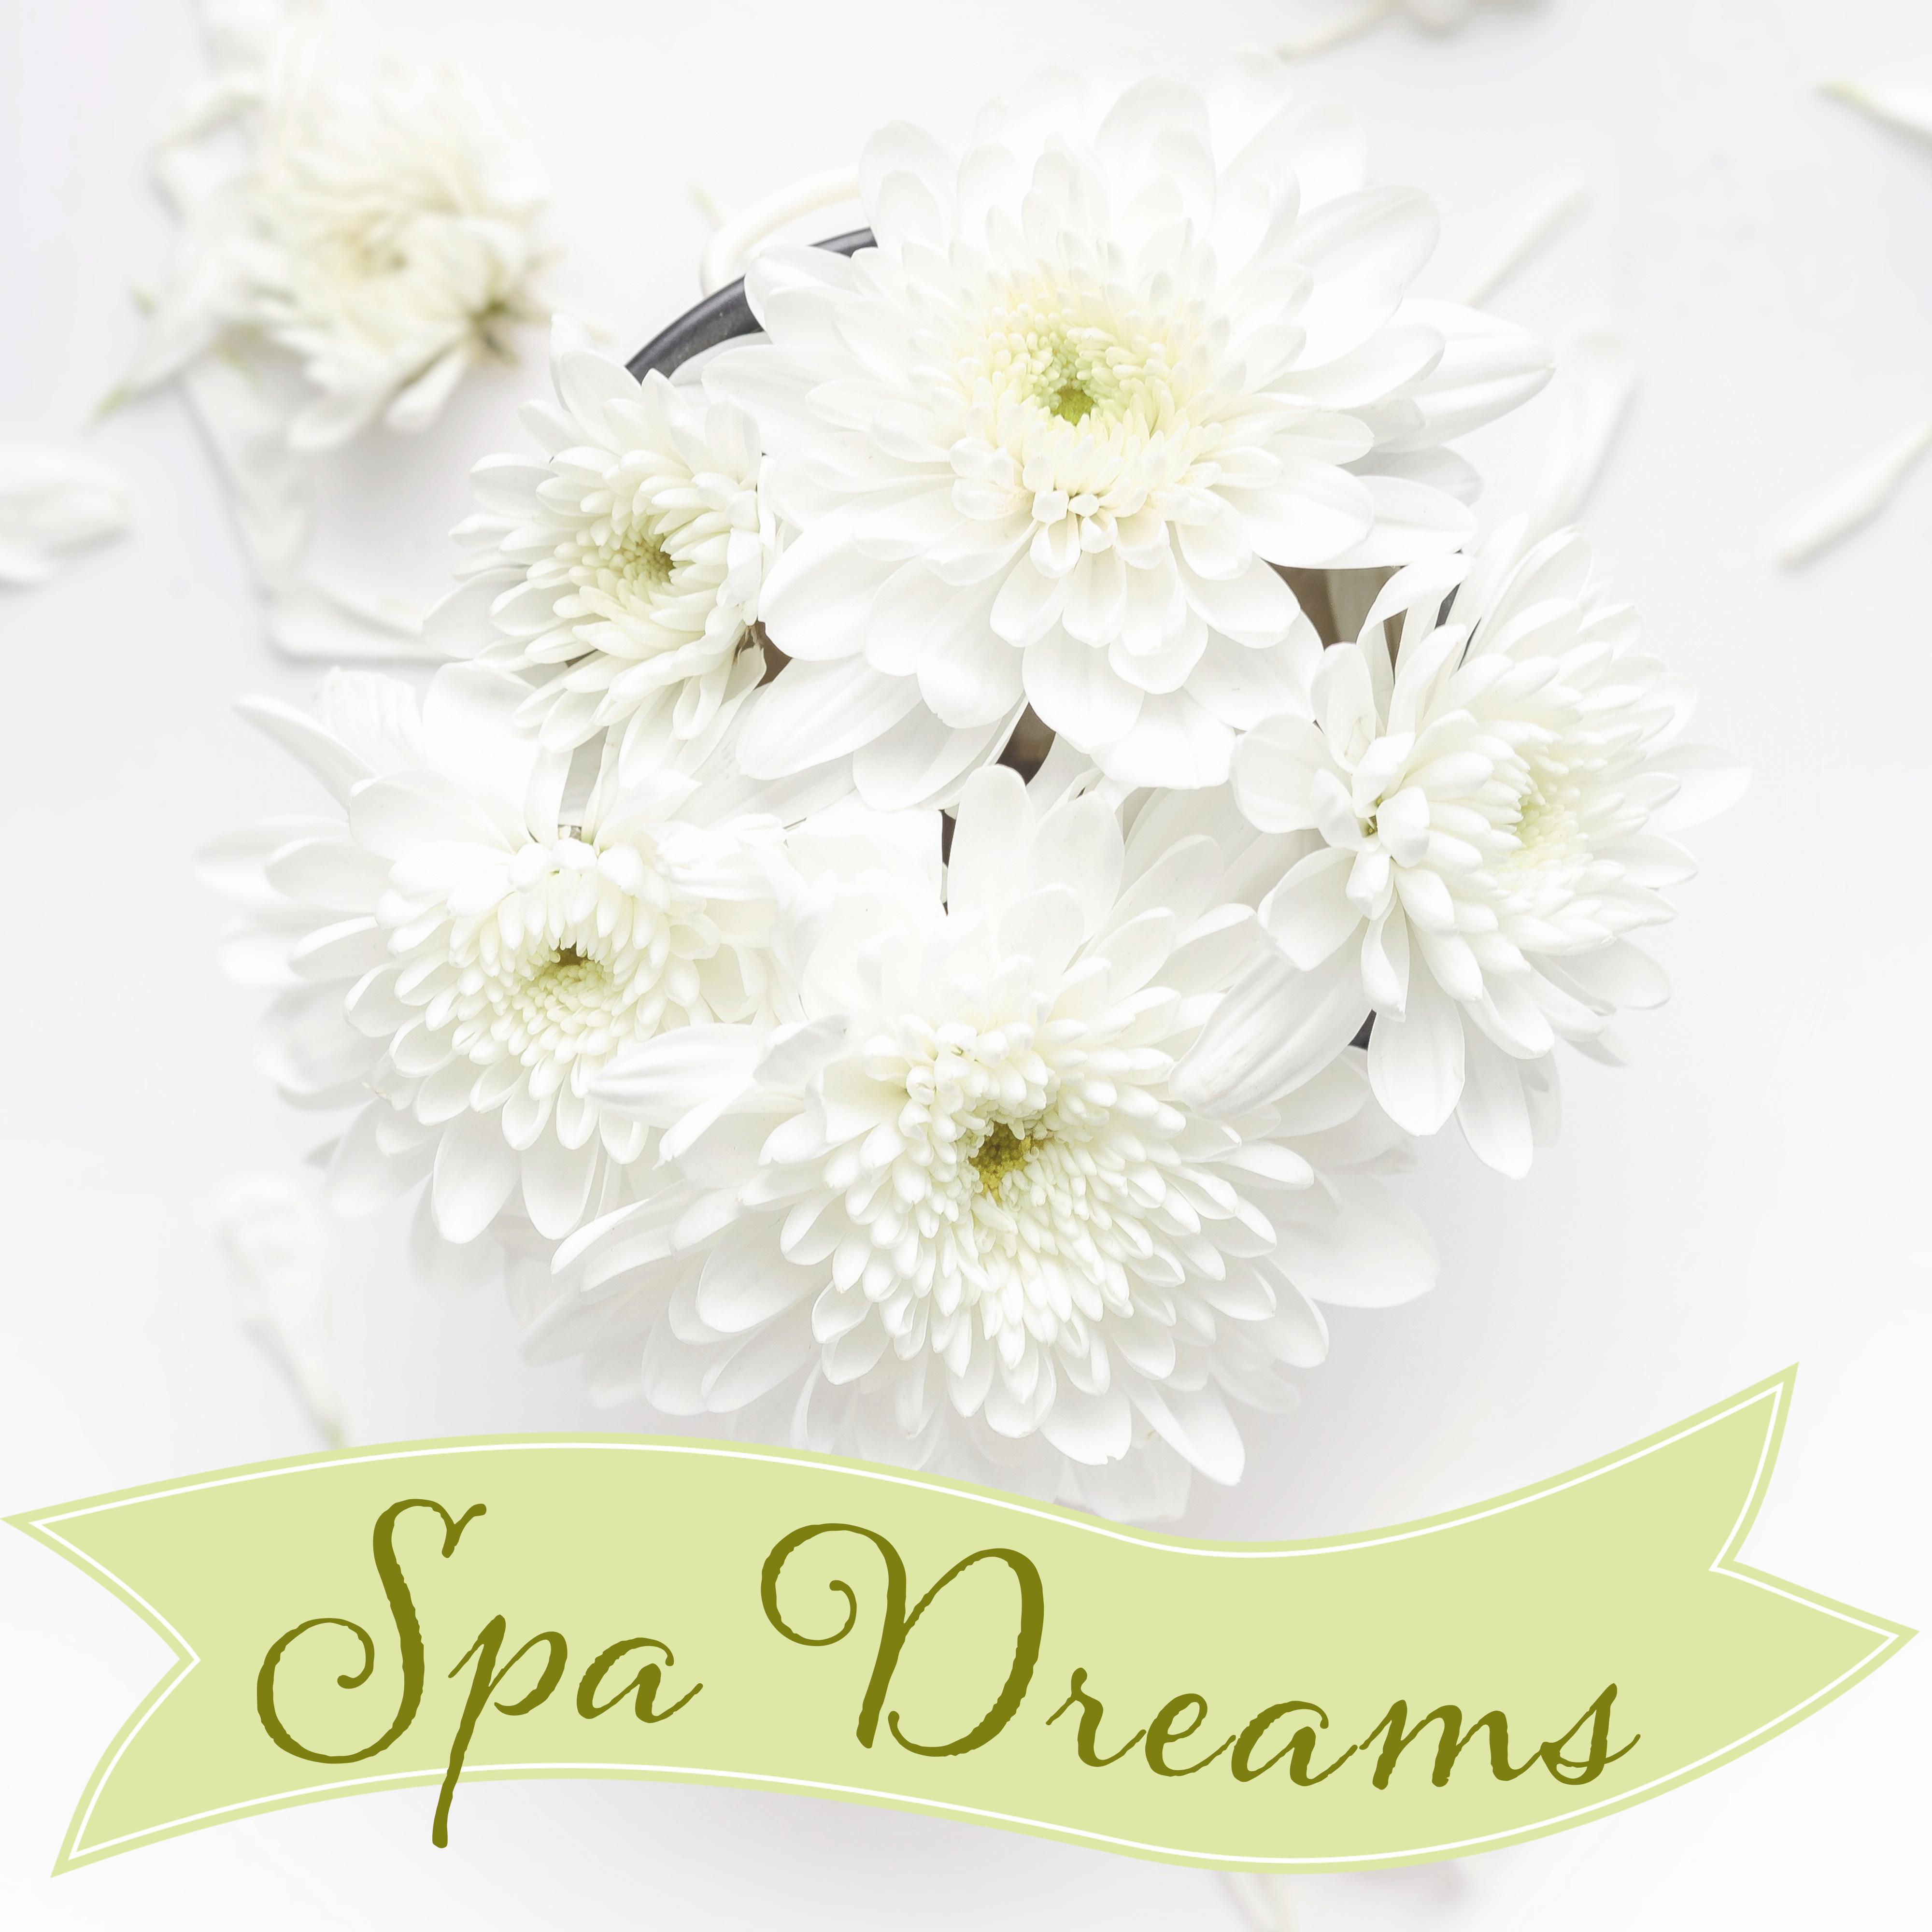 Spa Dreams – Best Relaxation, New Age, Sounds of Nature, Calm Down & Relax, Rest, Pure Mind